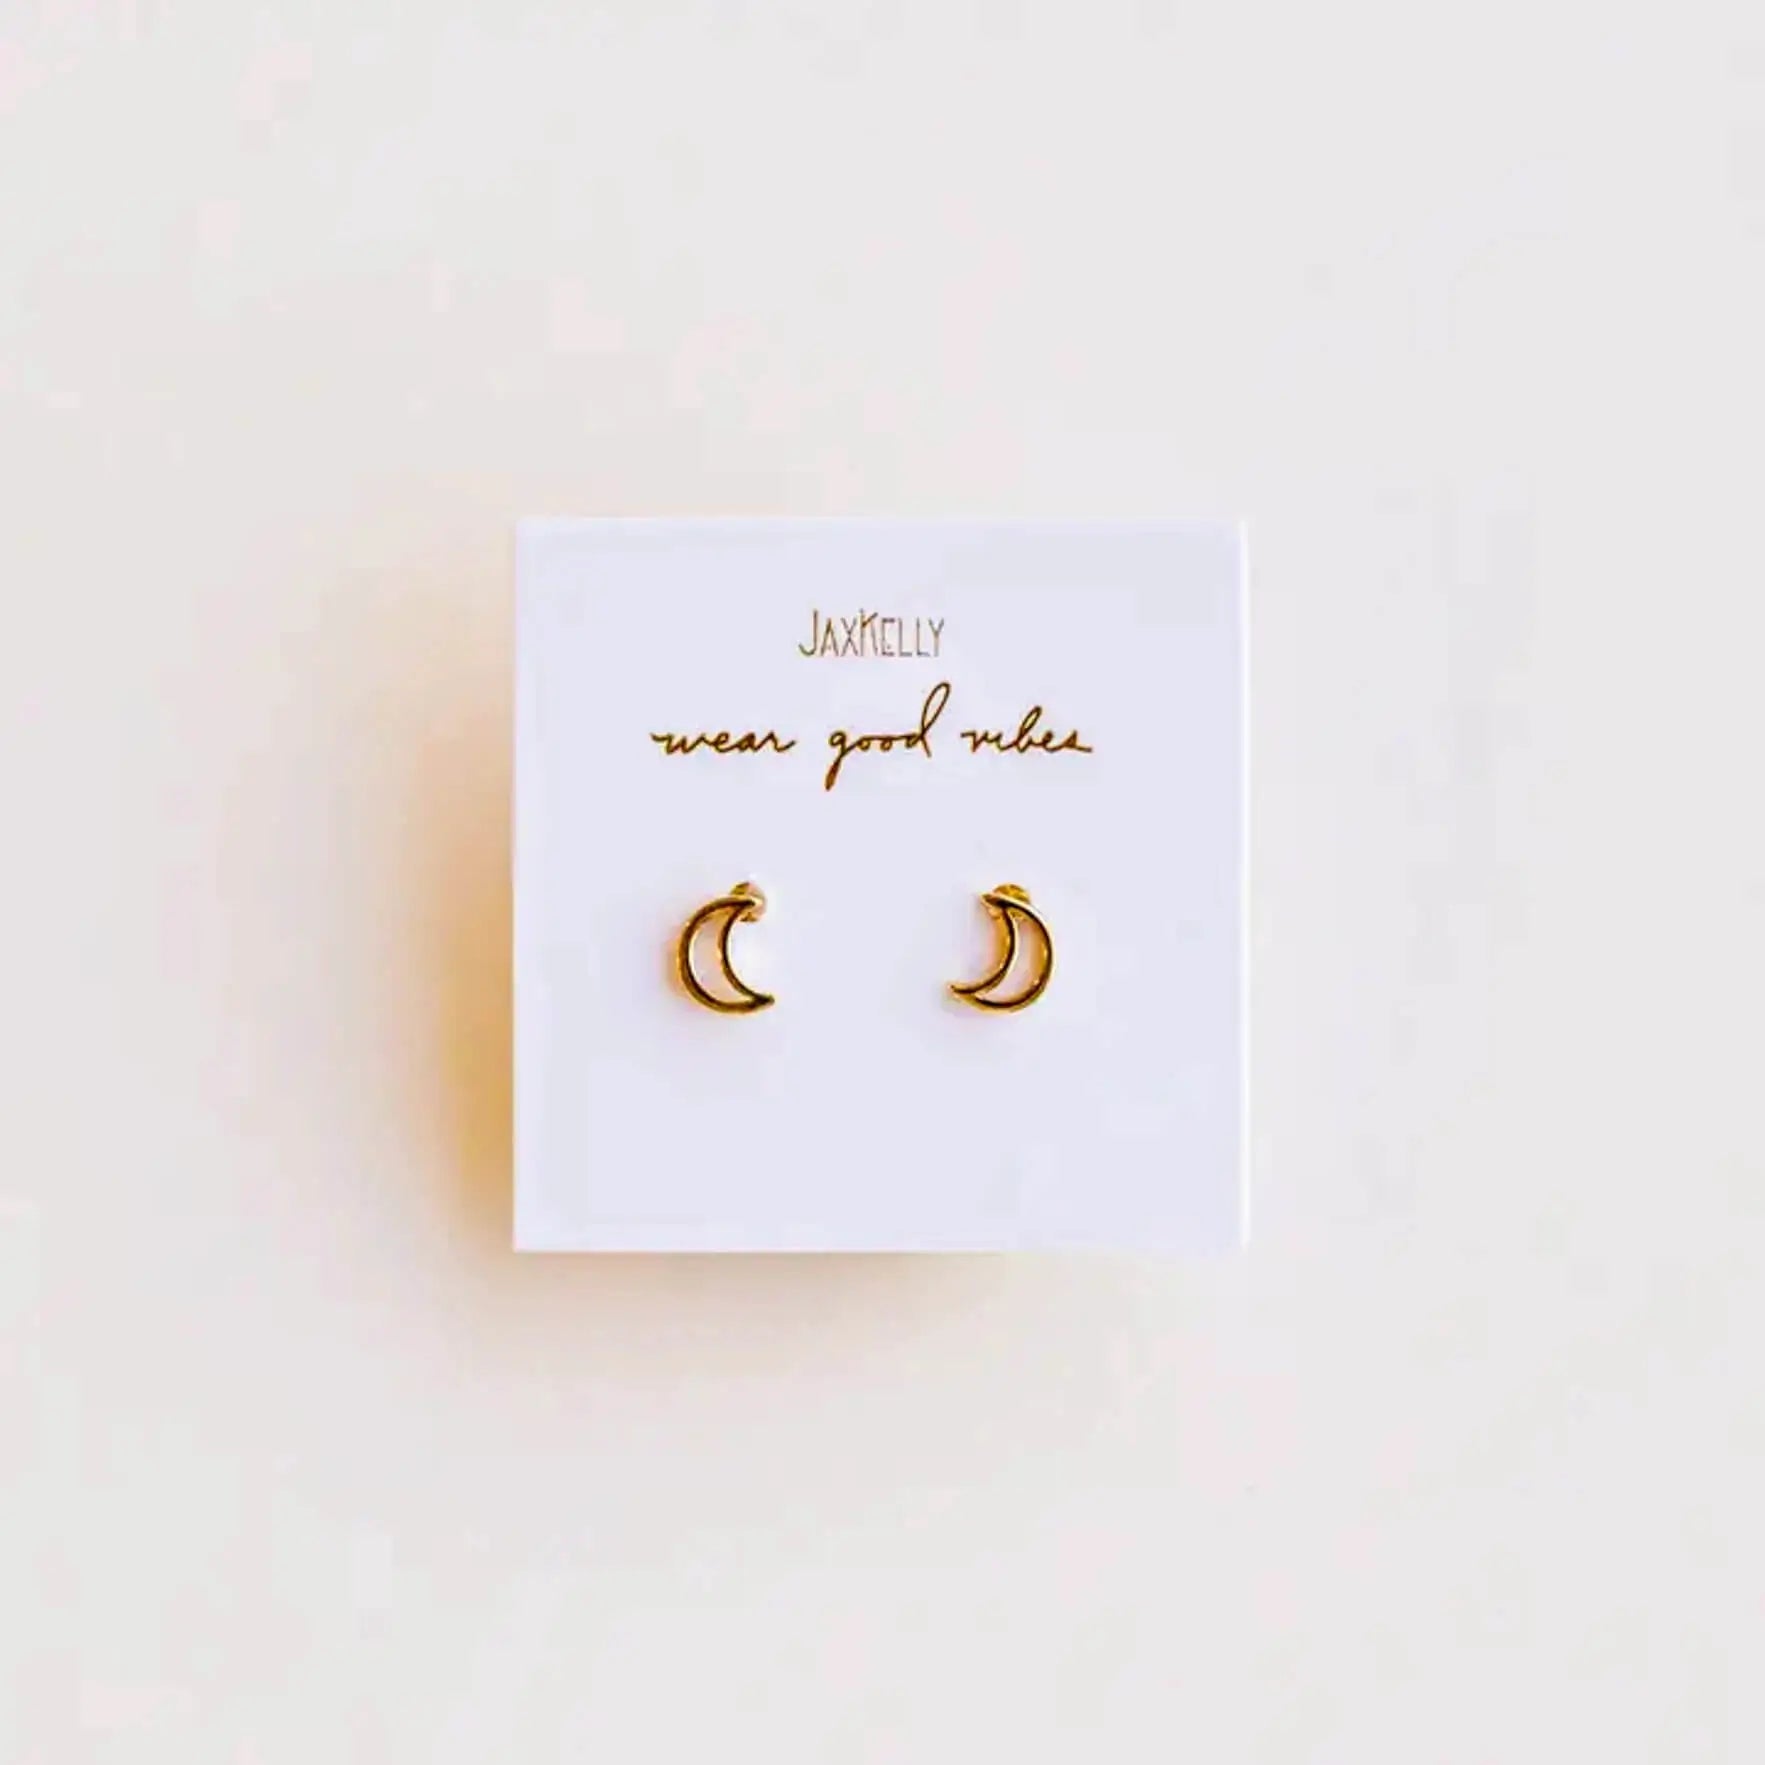 a pair of yellow gold moon shaped earrings